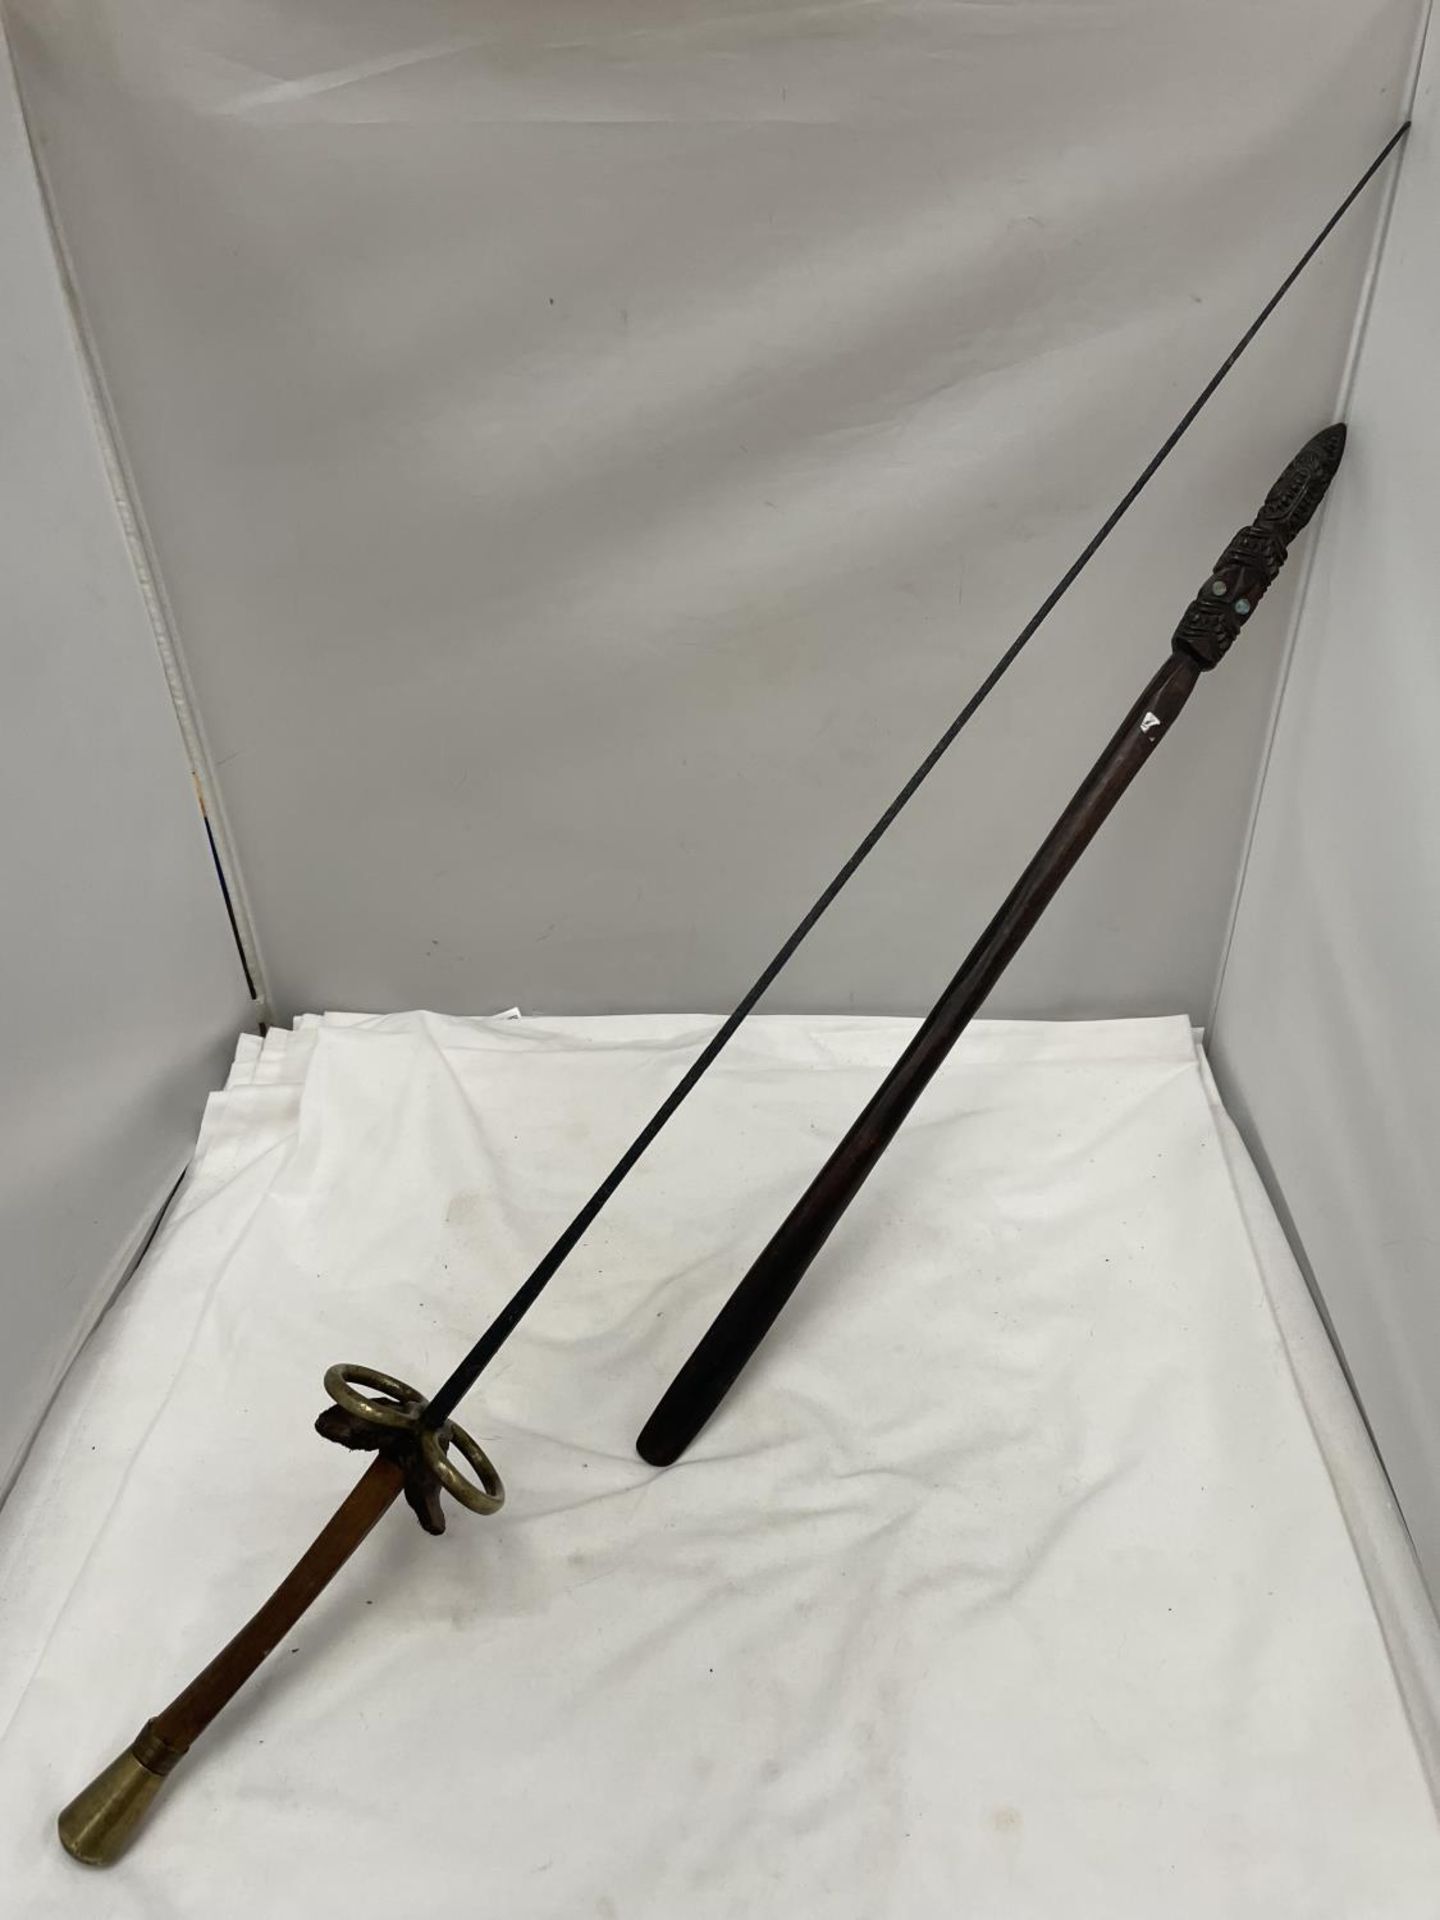 A VINTAGE RAPIER SWORD LENGTH APPROX 89CM AND A HAND CARVED AFRICAN WEAPON LENGTH 59CM